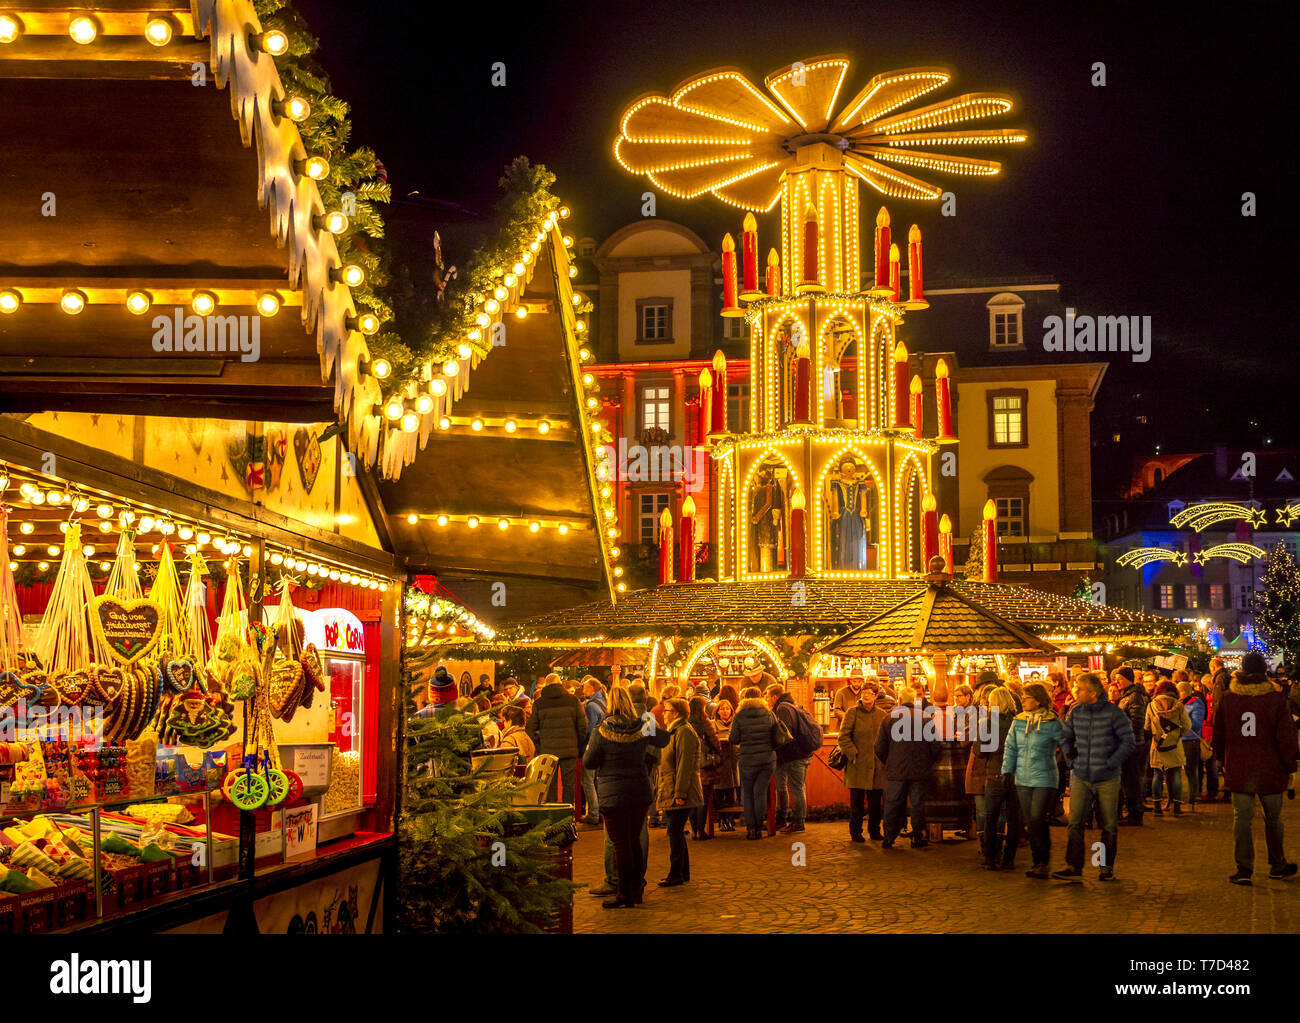 Christmas market at the market place in Heidelberg, Germany Stock Photo